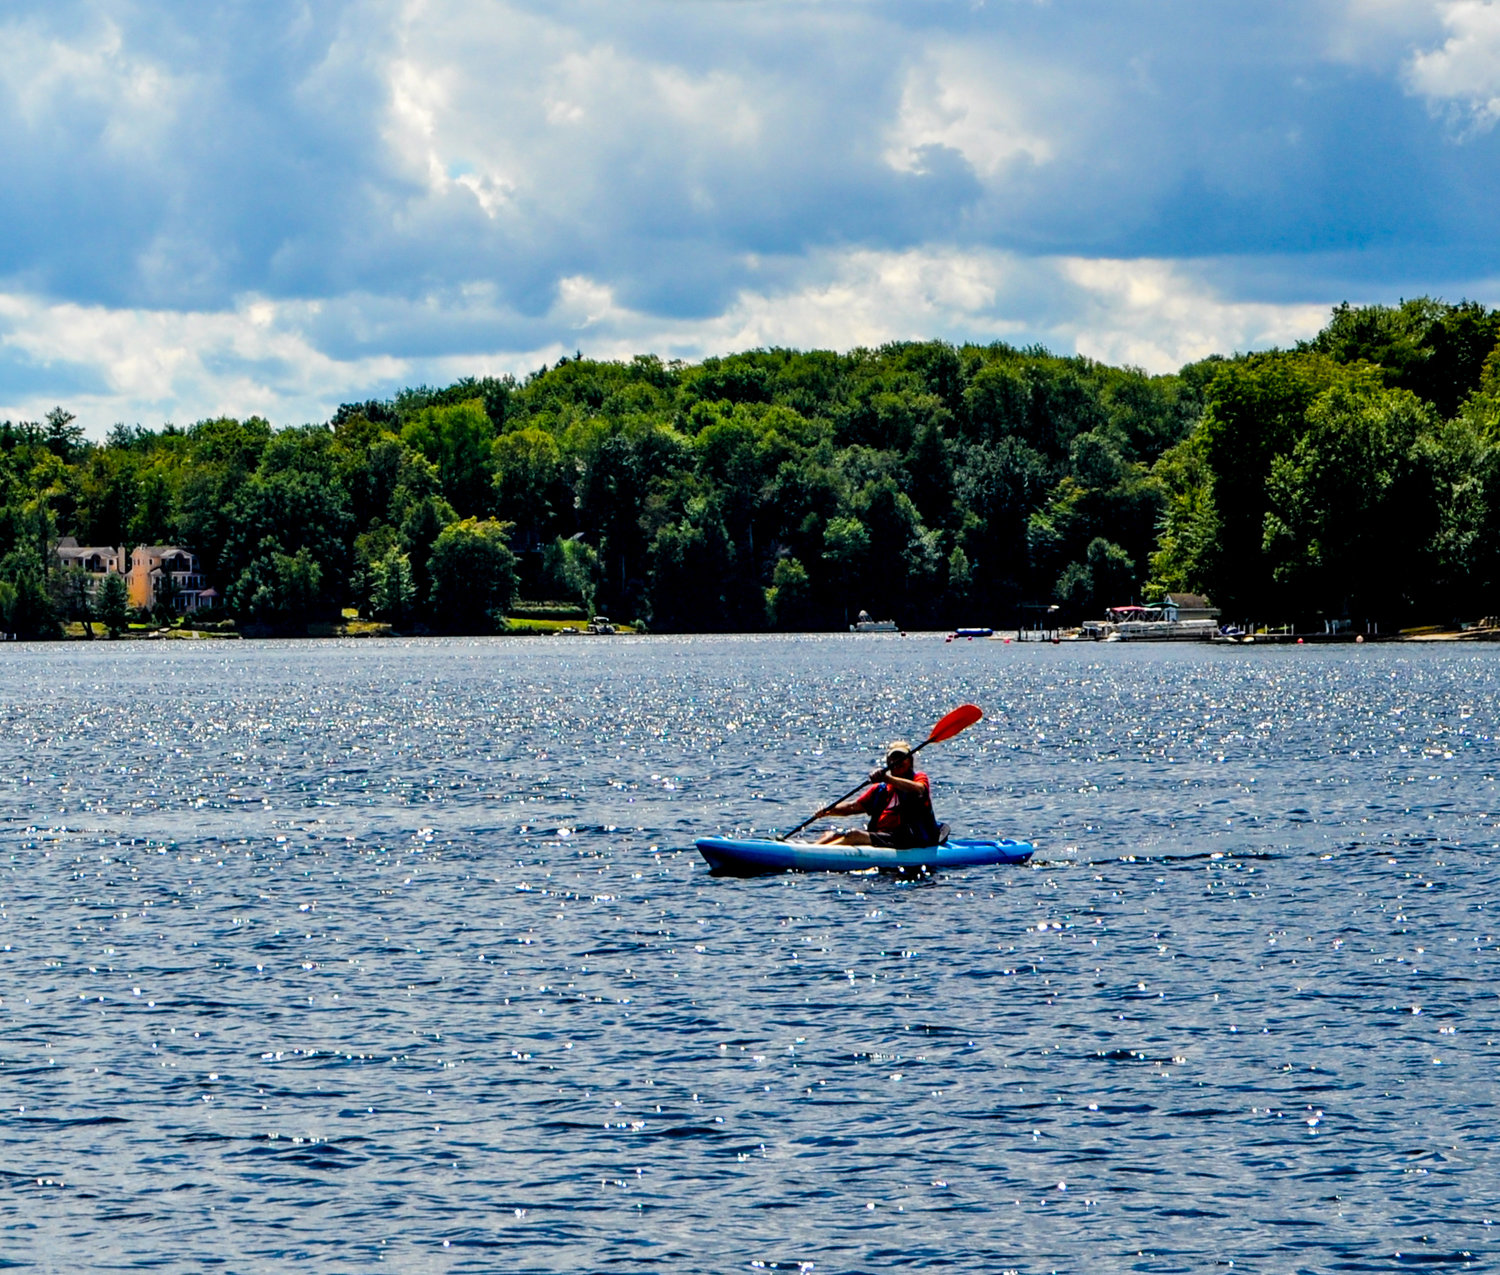 Canoeing has been a tradition here for decades.